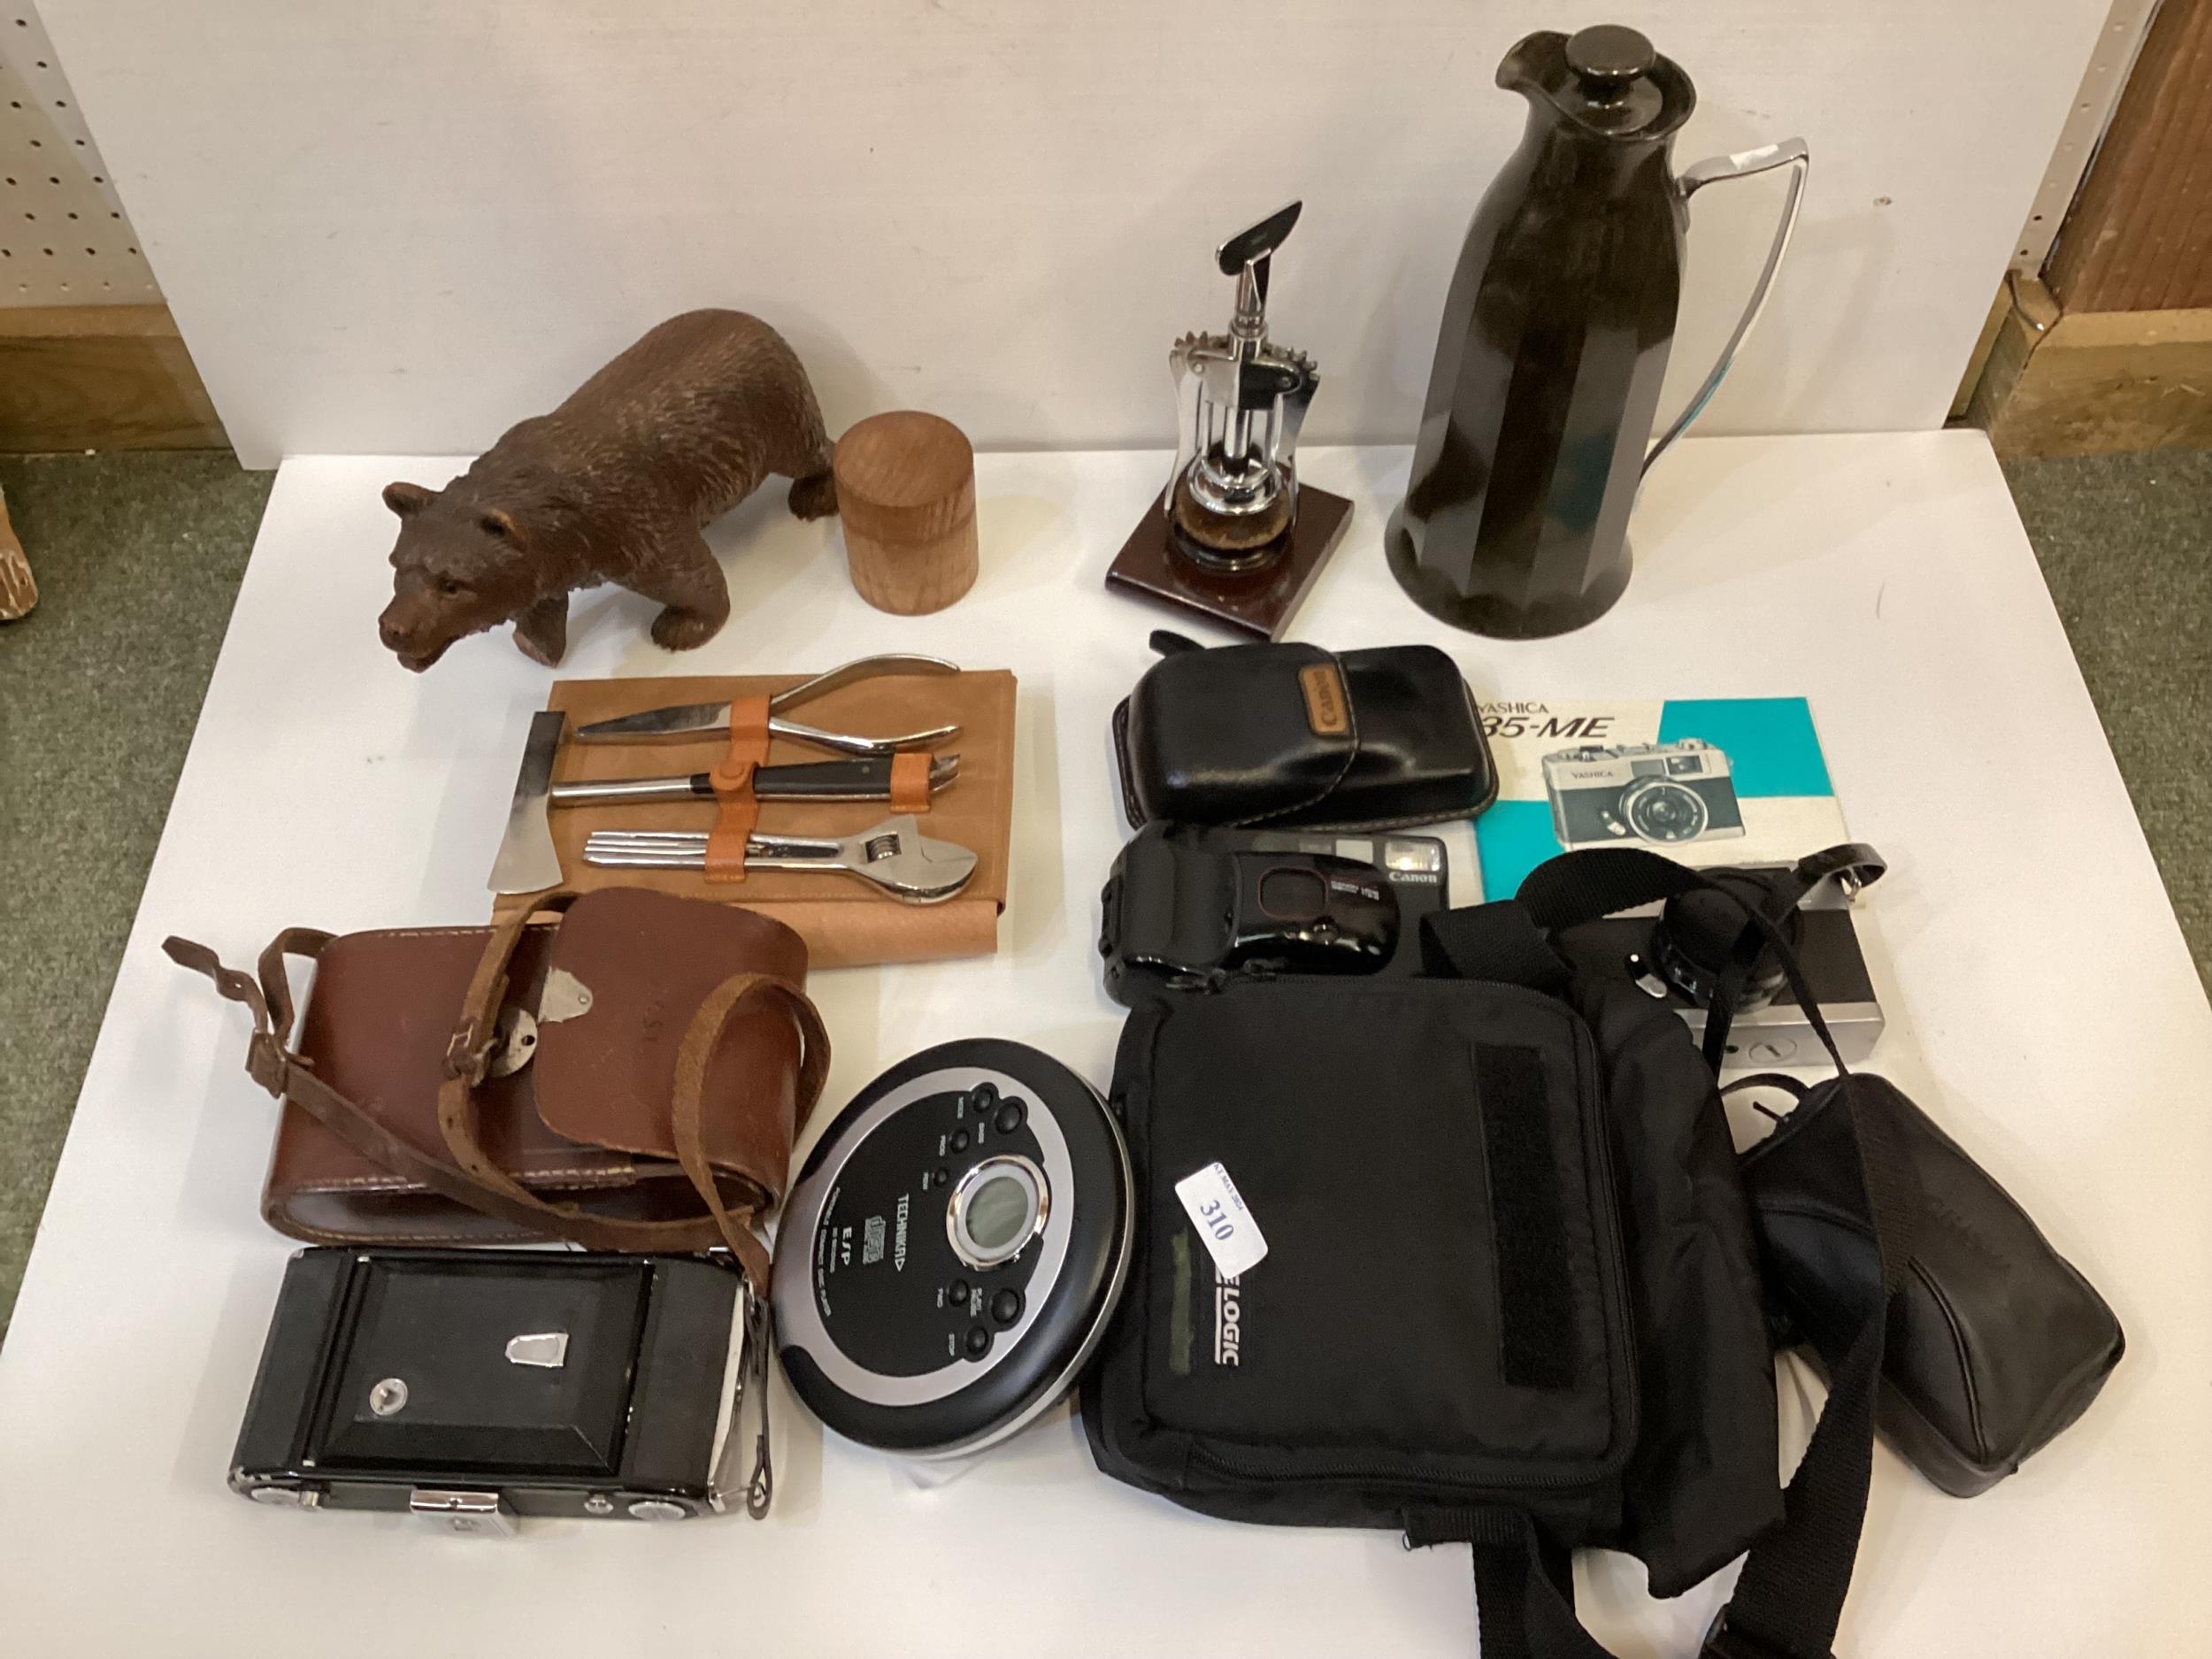 A quantity of Vintage Cameras, a vintage leather cased tool set, thermos, bottle/wine opener etc